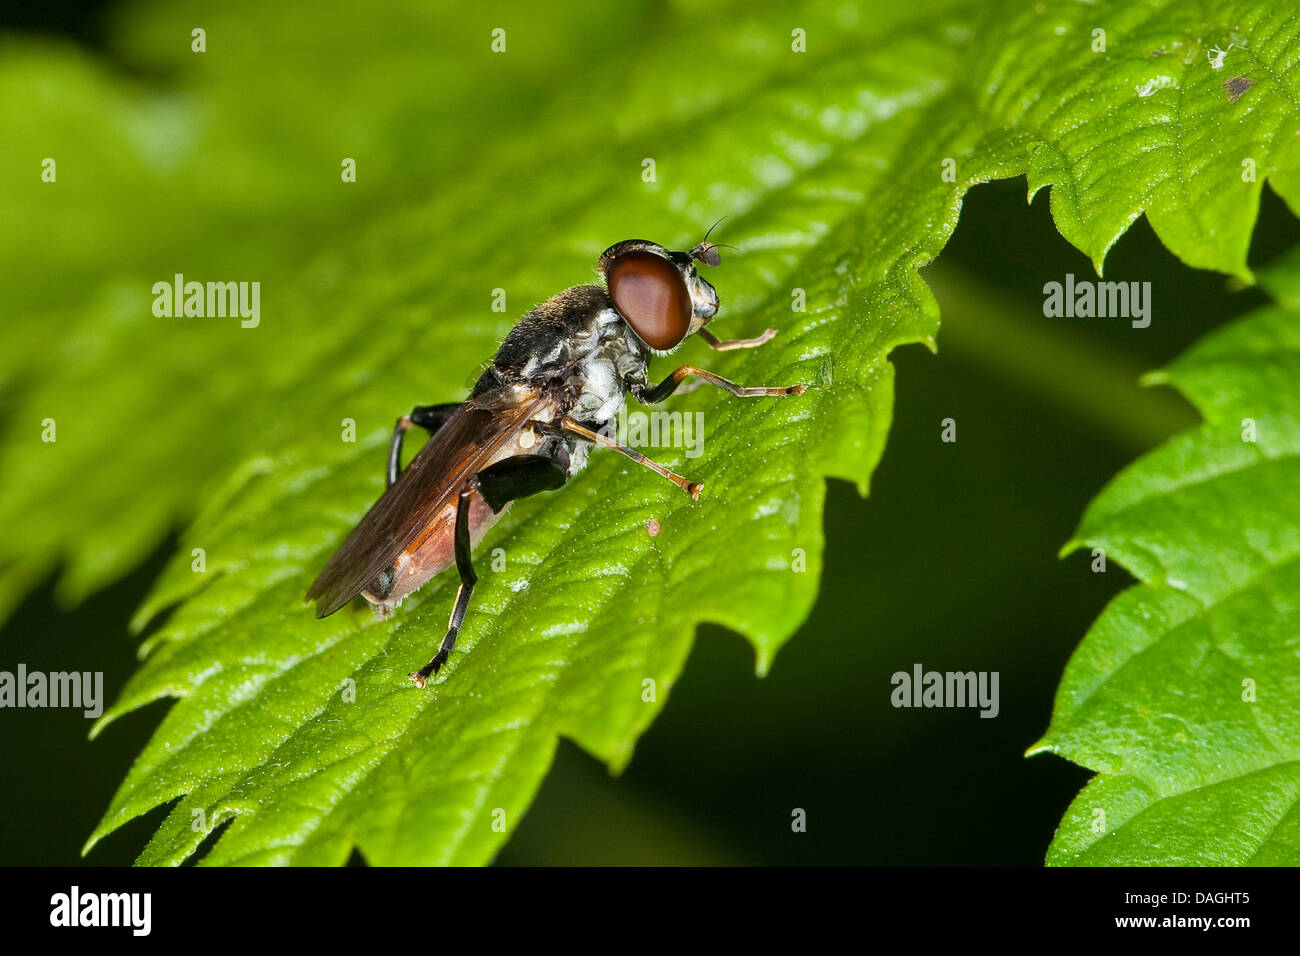 Hoverfly, Hover-fly (Tropidia scita), on a leaf, Germany Stock Photo